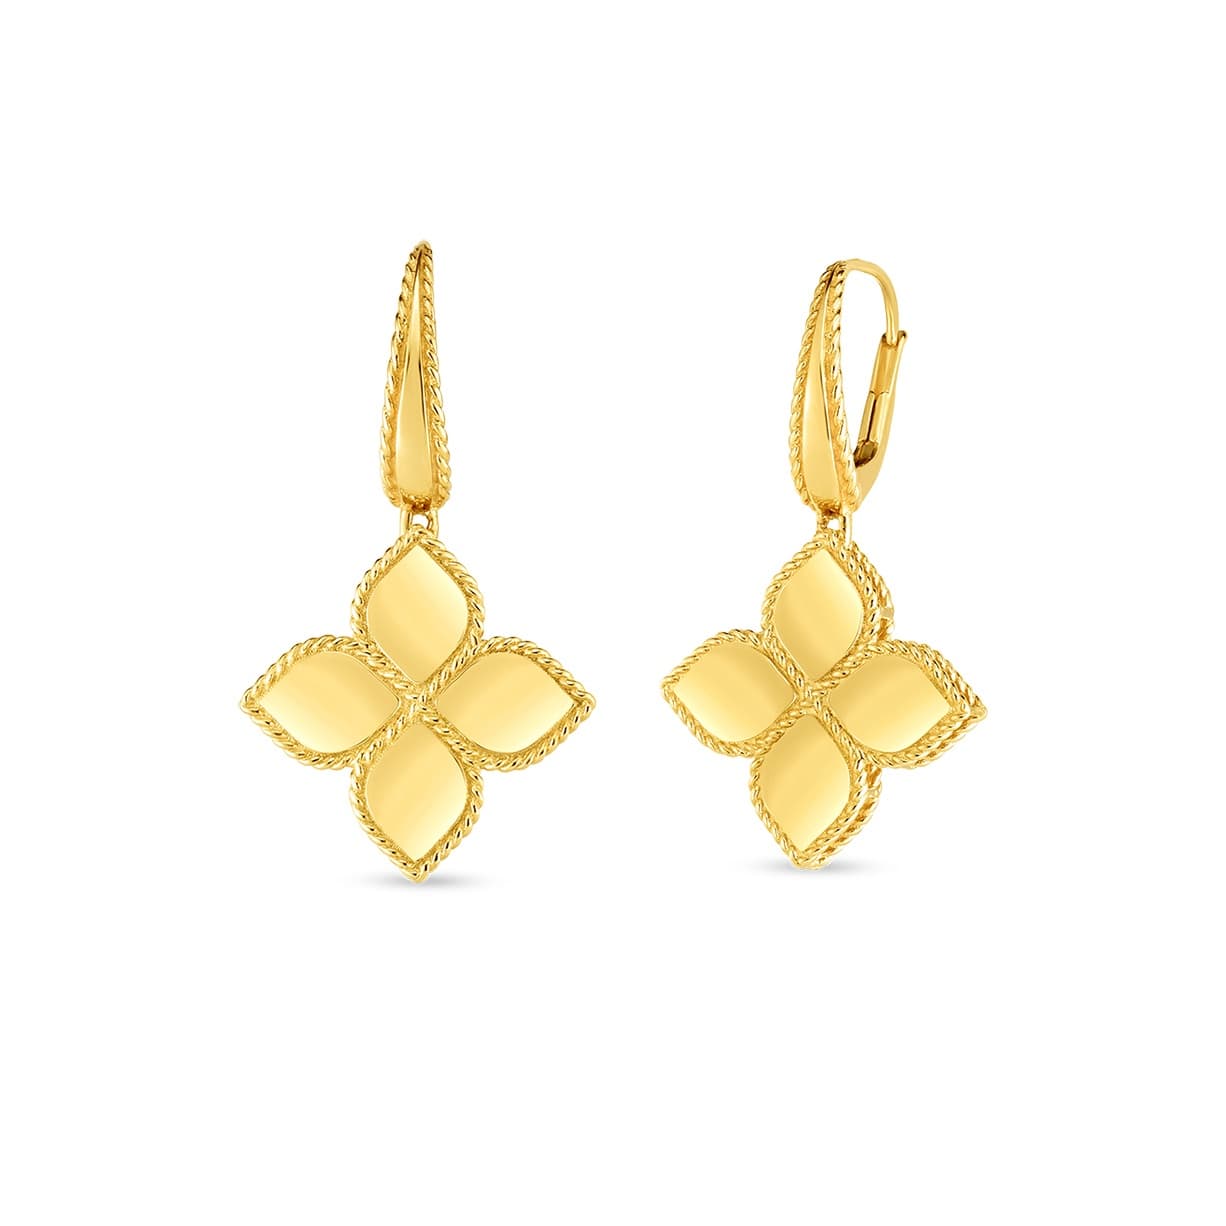 Roberto Coin 18K Yellow Gold Princess Flower Drop Earrings, 1.5 inches 0